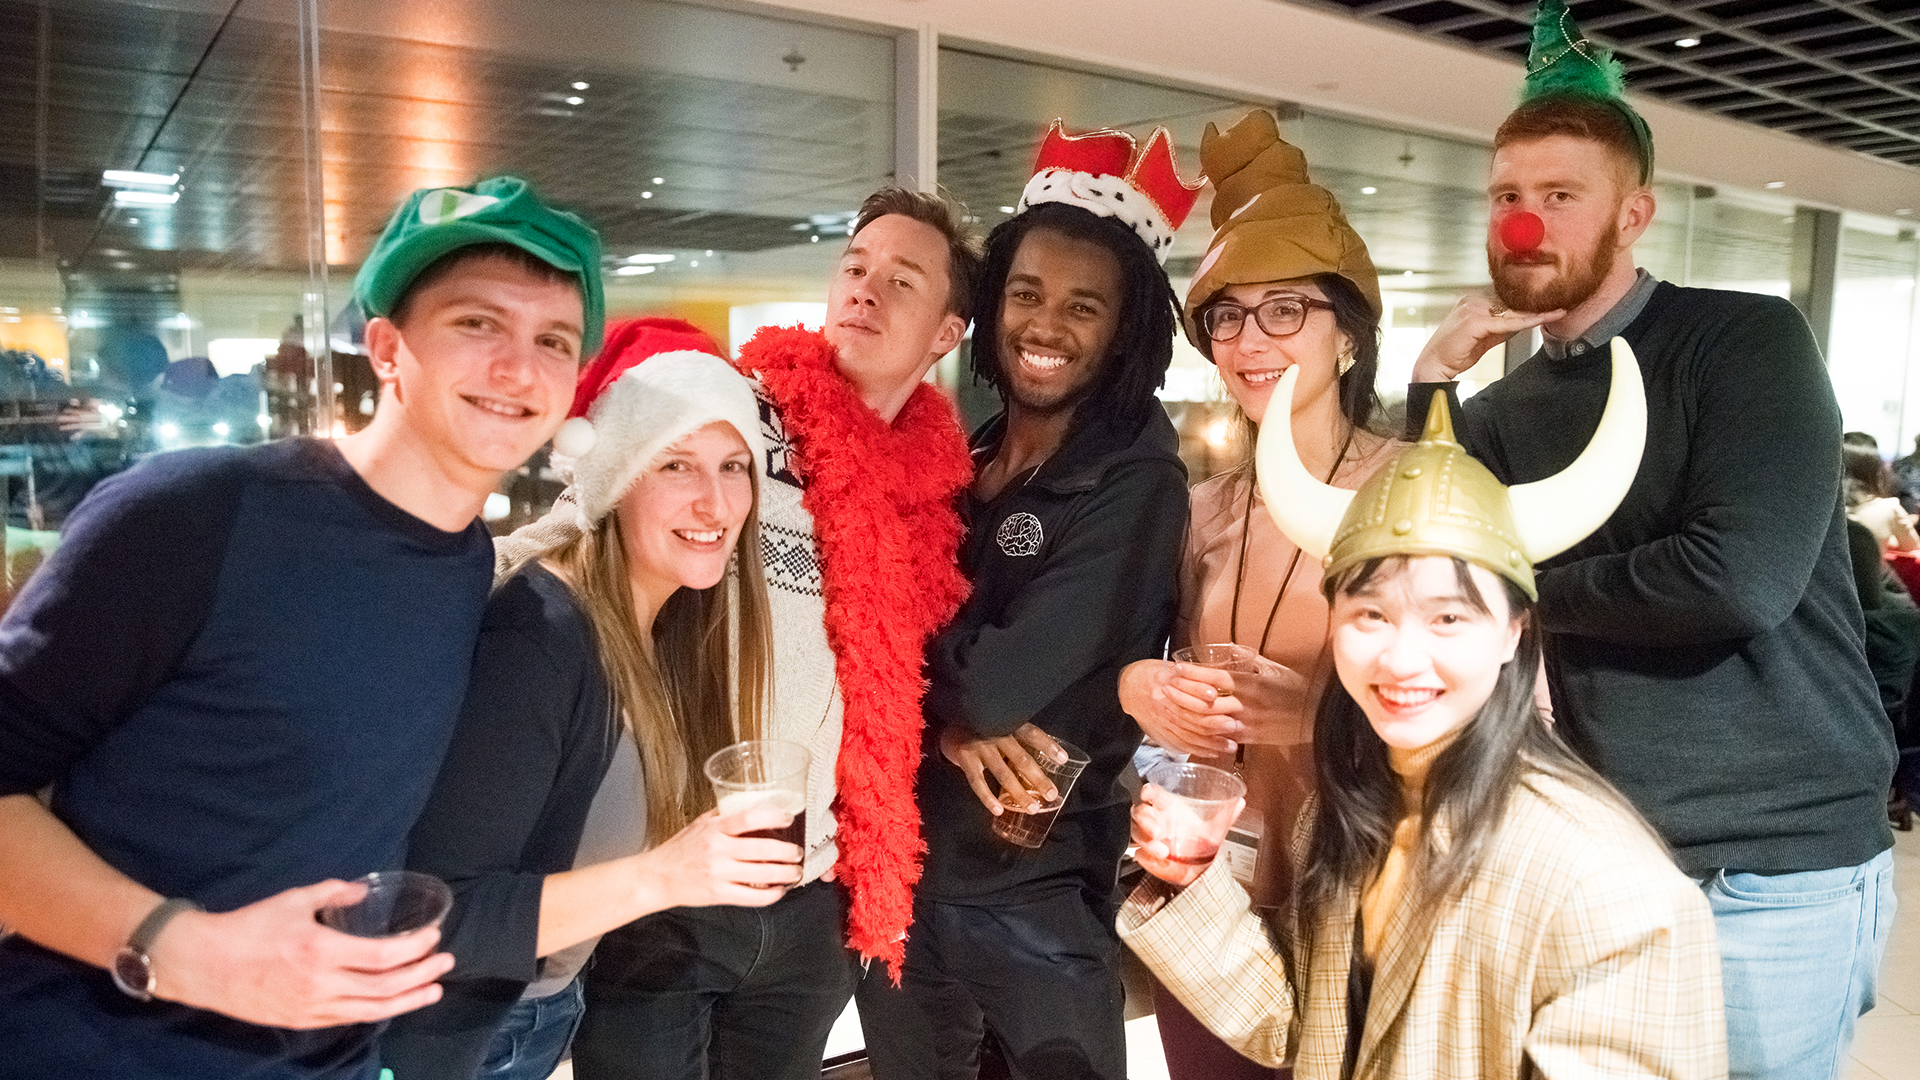 Seven people in funny hats at a holiday party